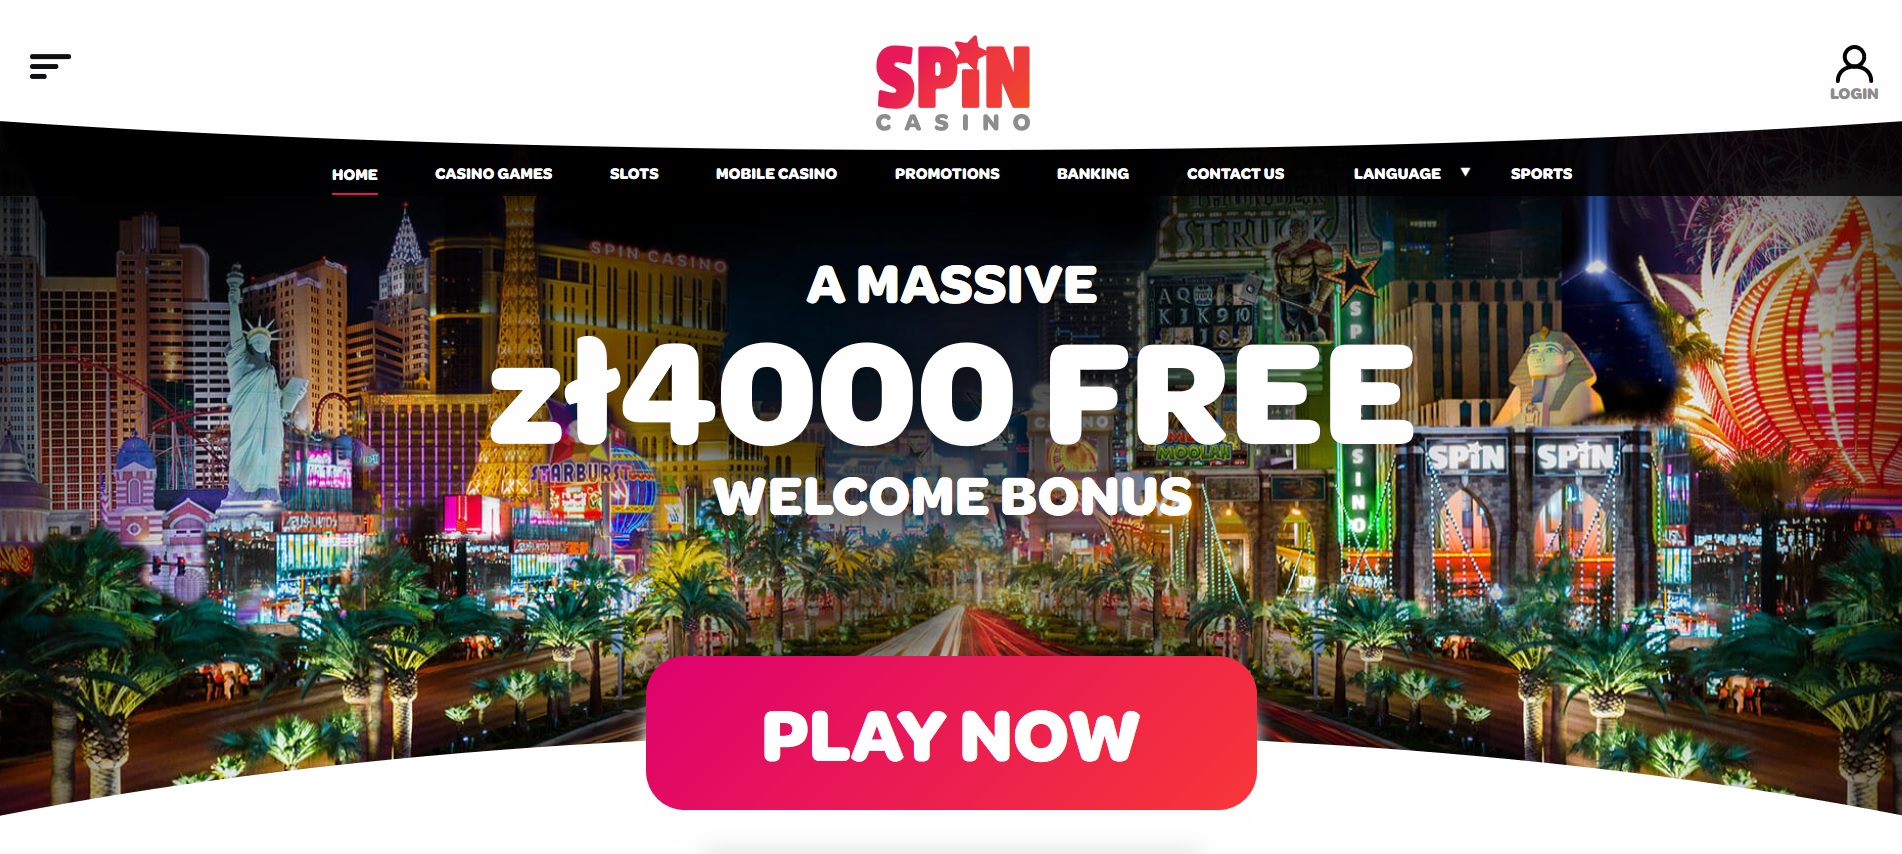 play casino games free online